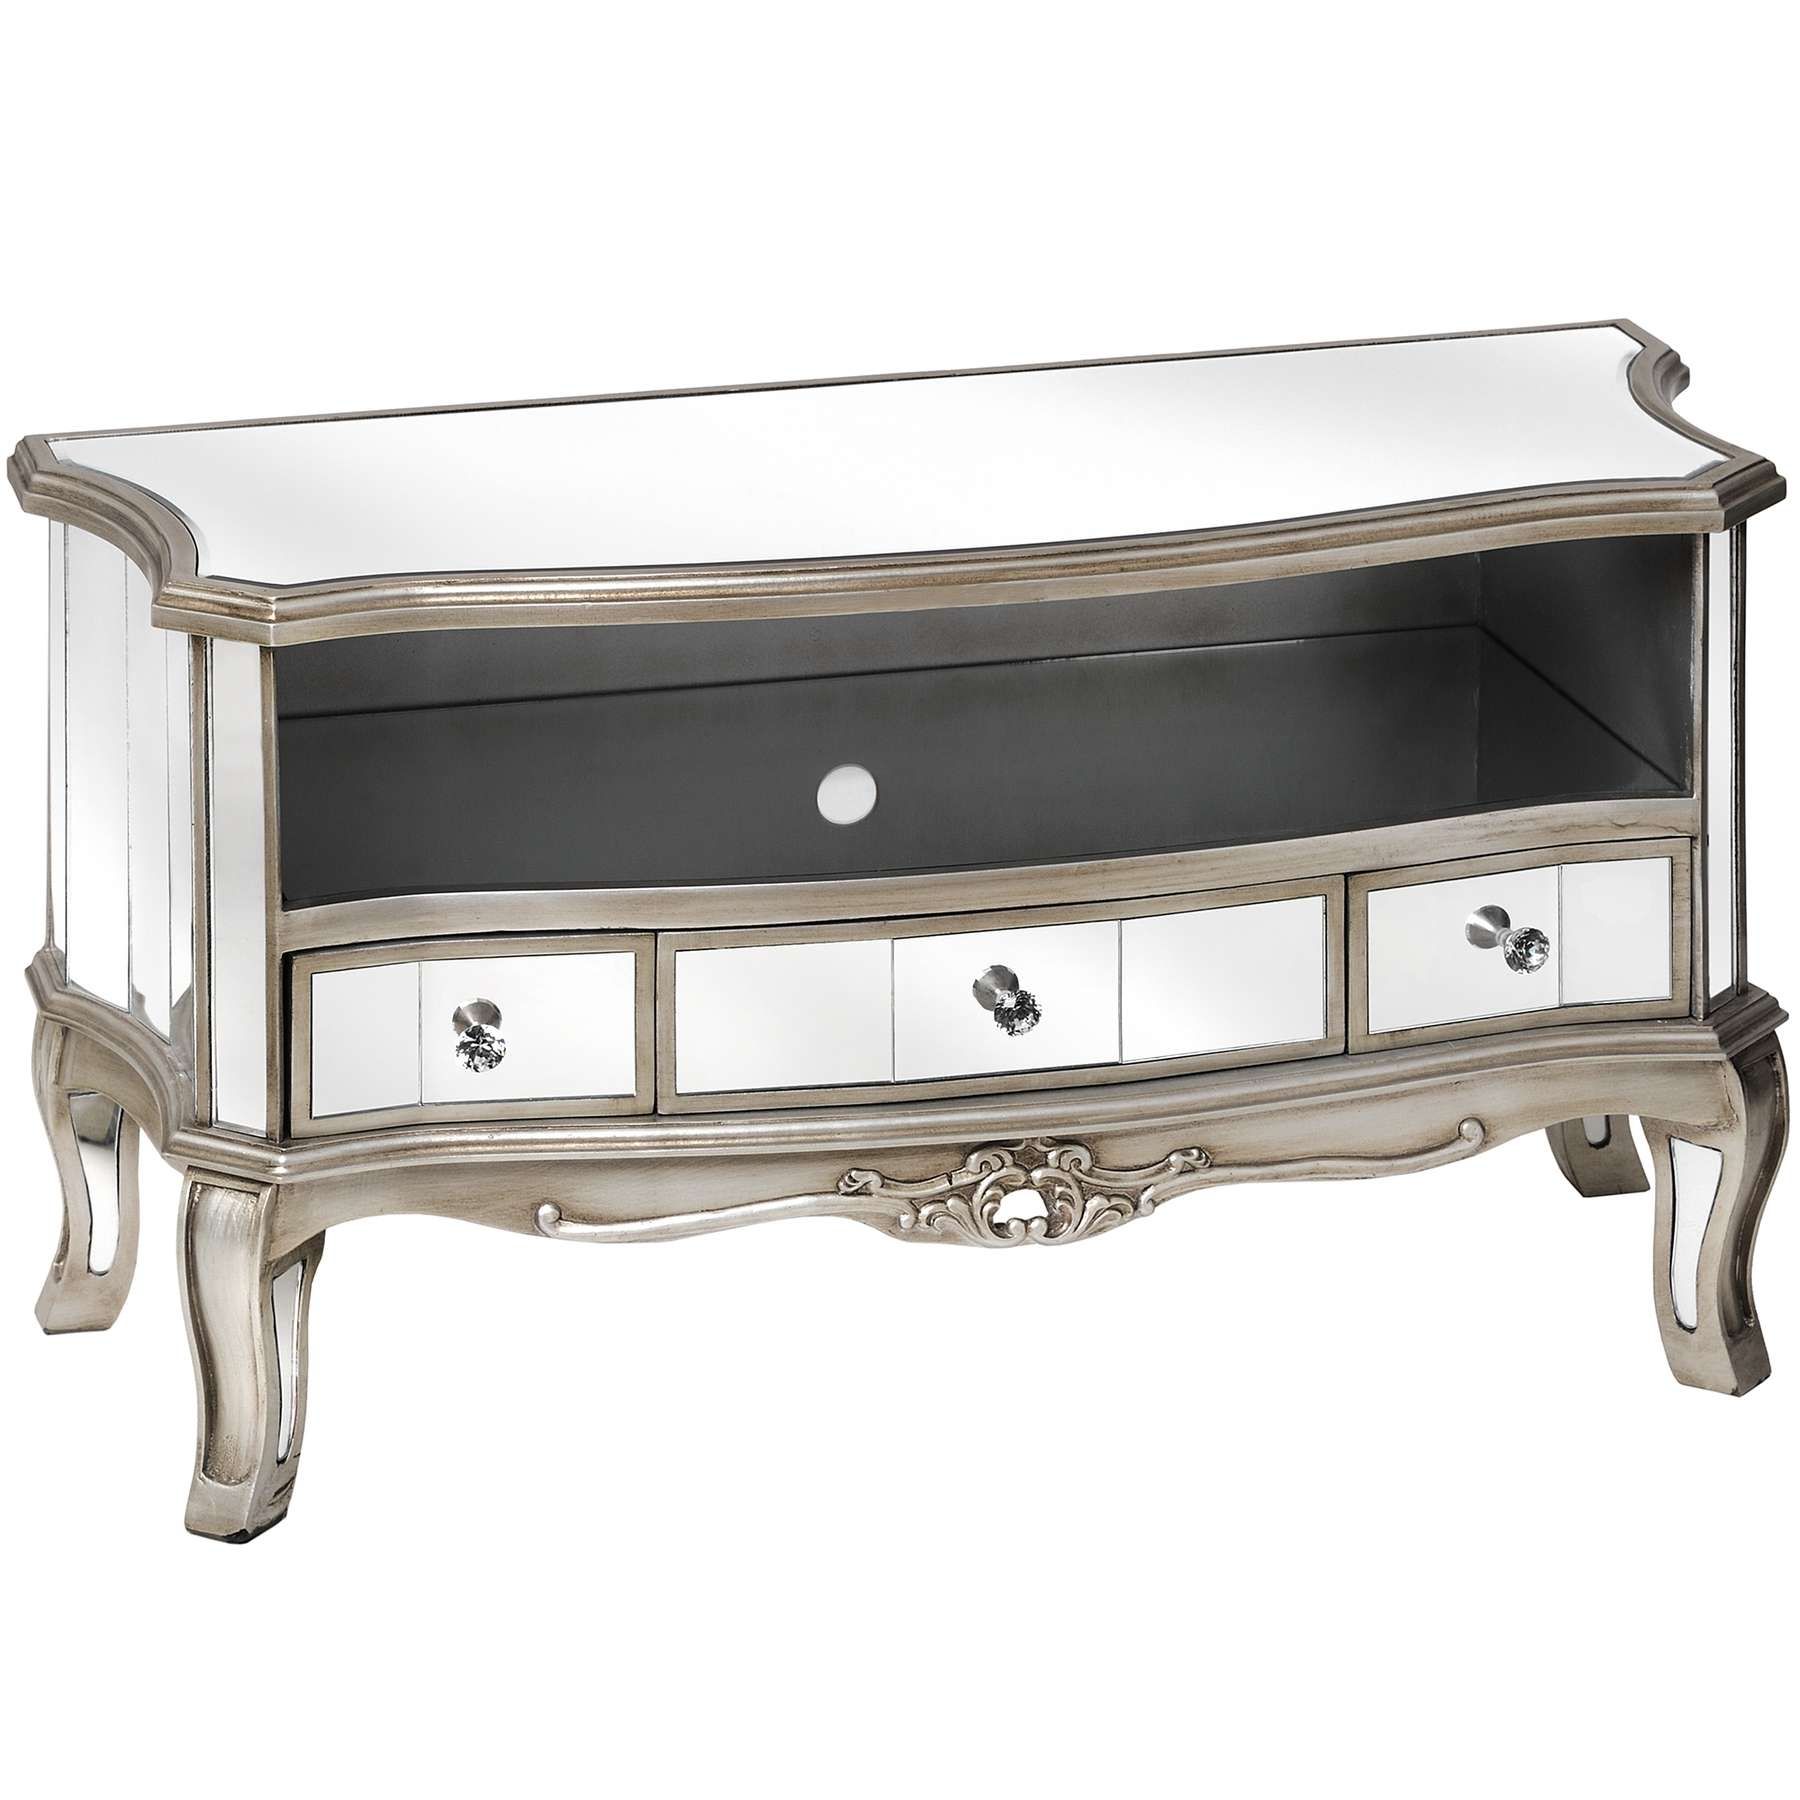 Argente Mirrored Television Cabinet | From Baytree Interiors Within Mirror Tv Cabinets (View 10 of 20)